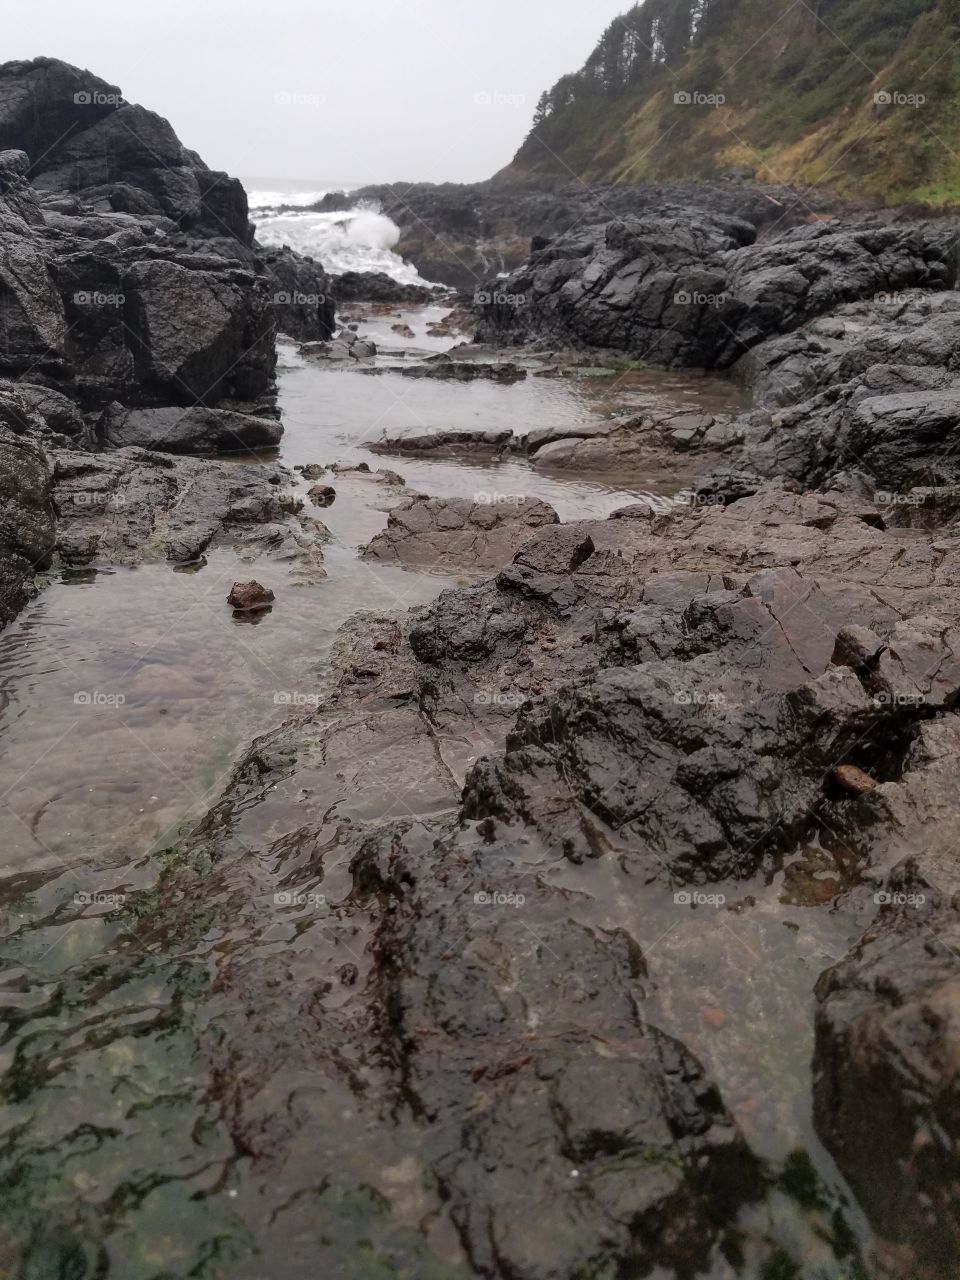 puddles on the rocky shore